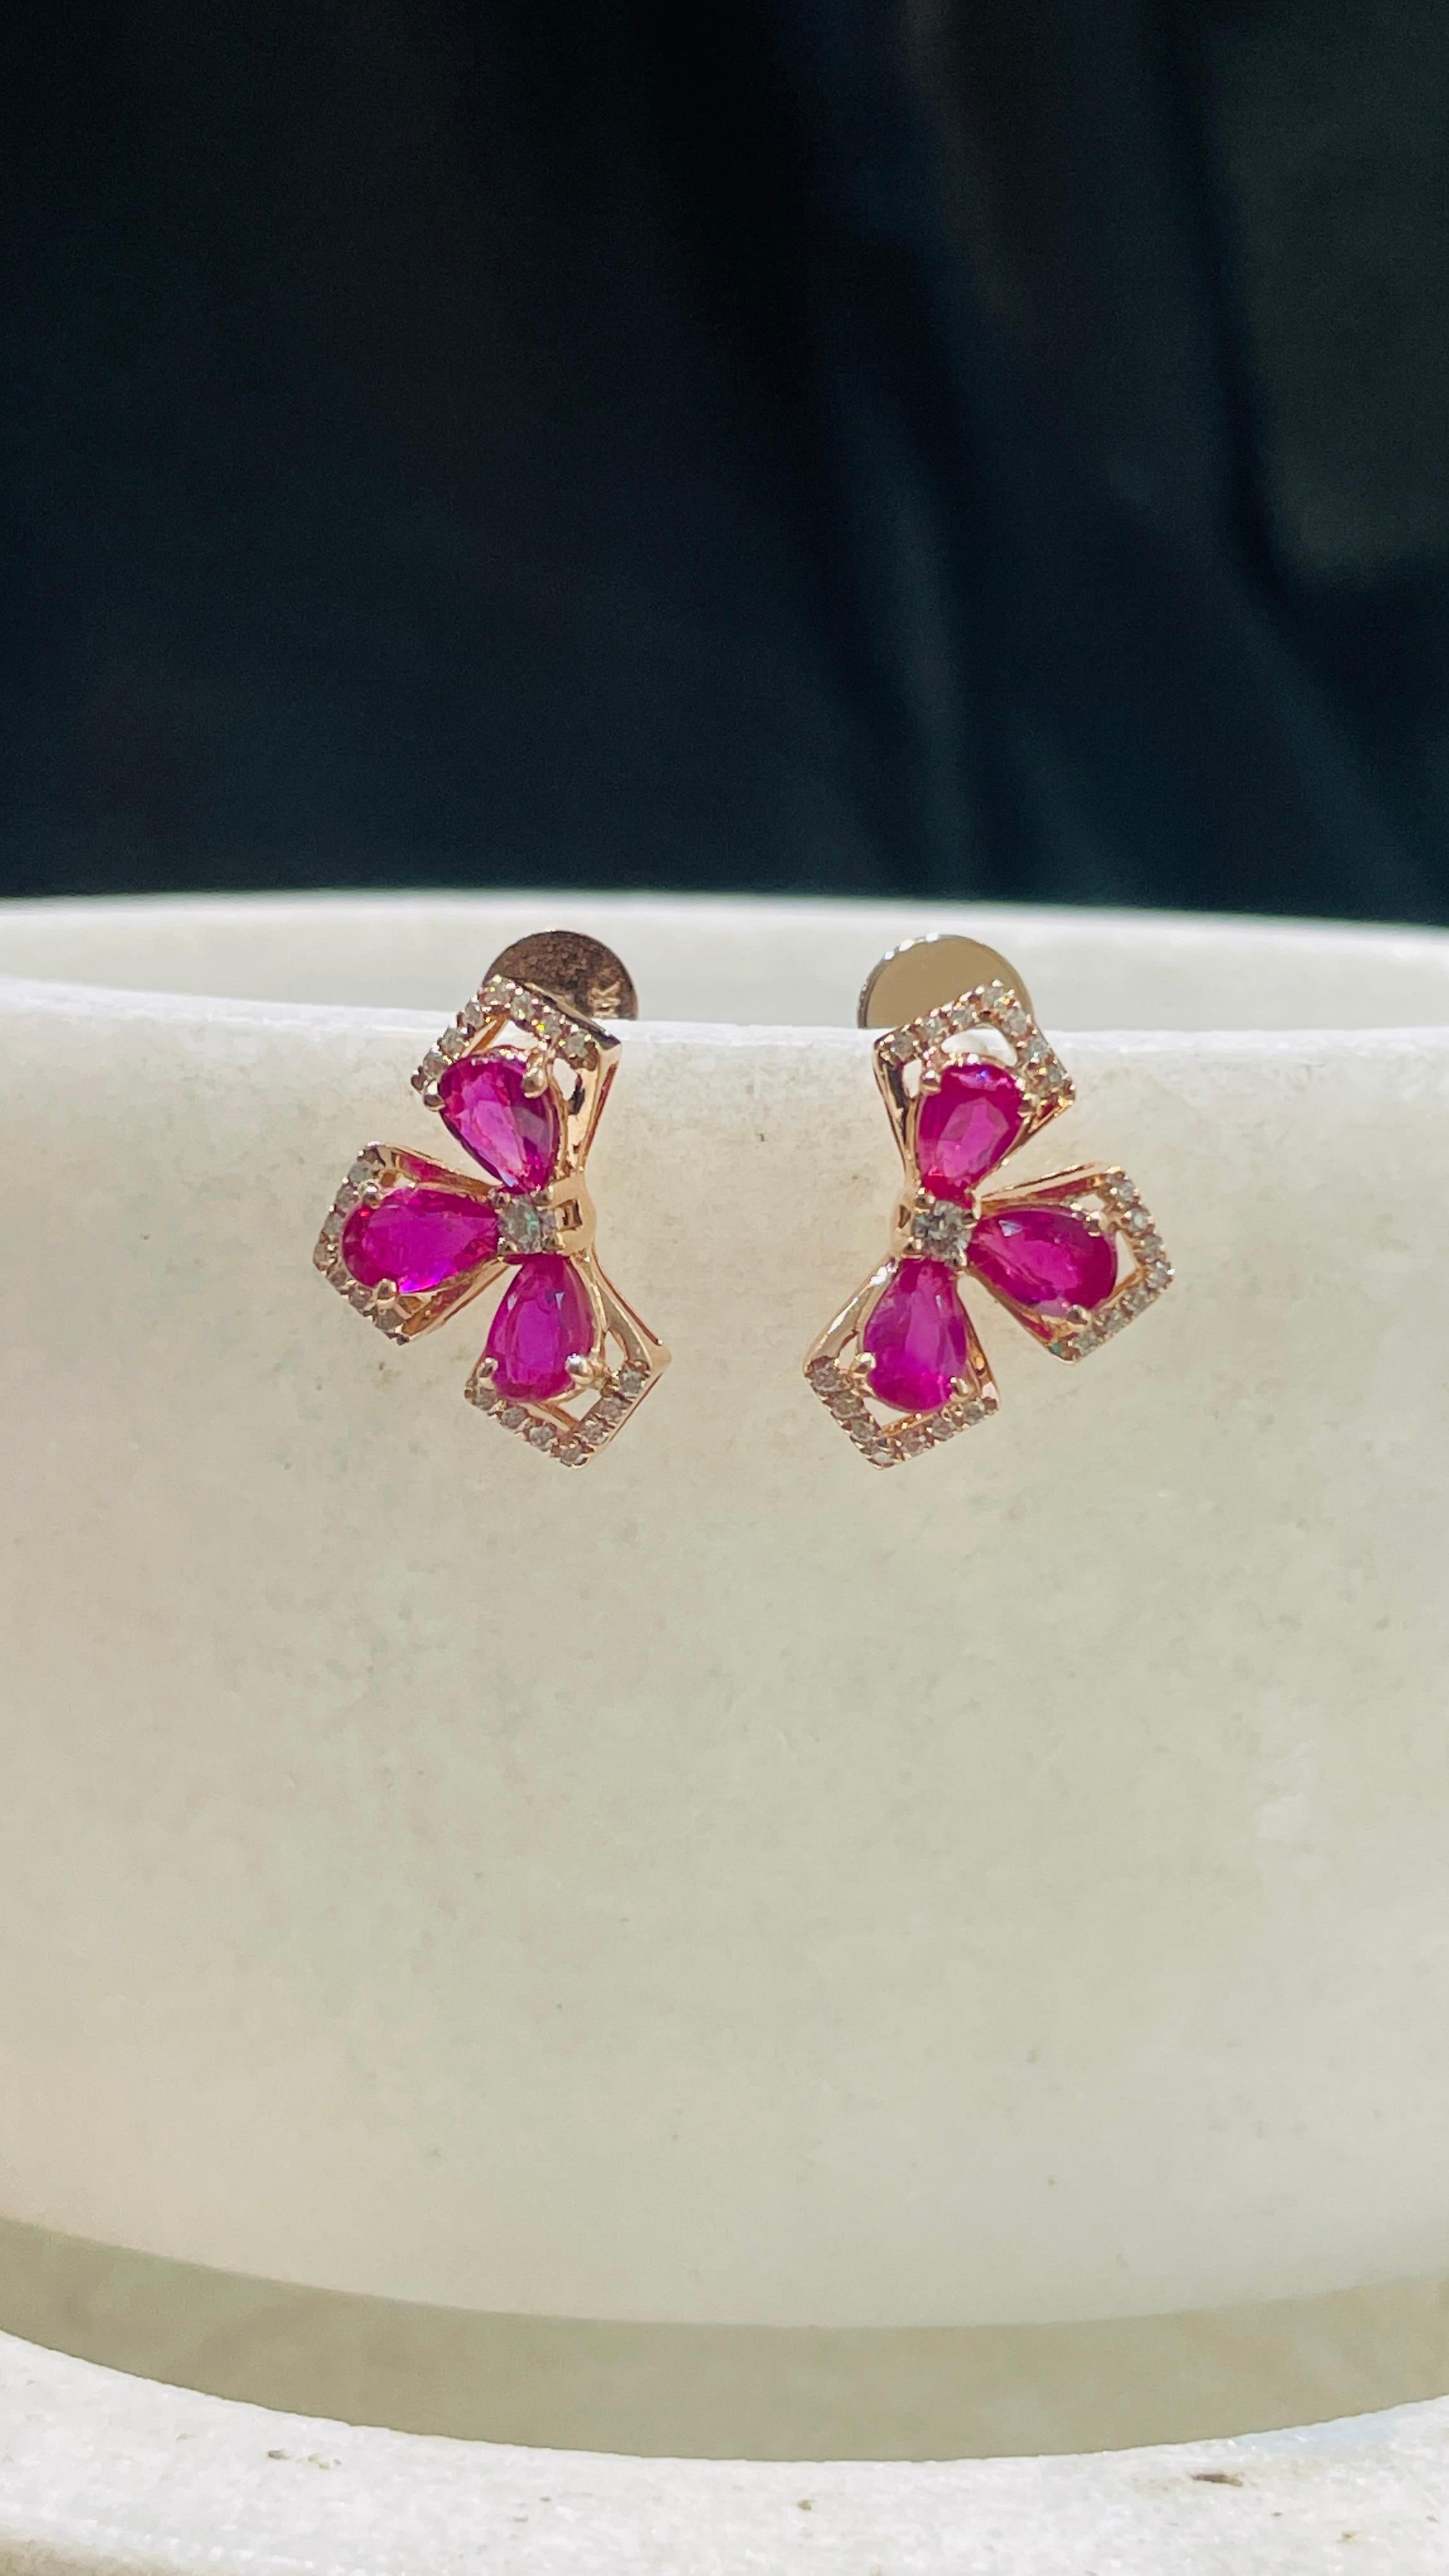 Earrings create a subtle beauty while showcasing the colors of the natural precious gemstones and illuminating diamonds making a statement.

Pear cut Ruby earrings in 14K gold. Embrace your look with these stunning pair of earrings suitable for any